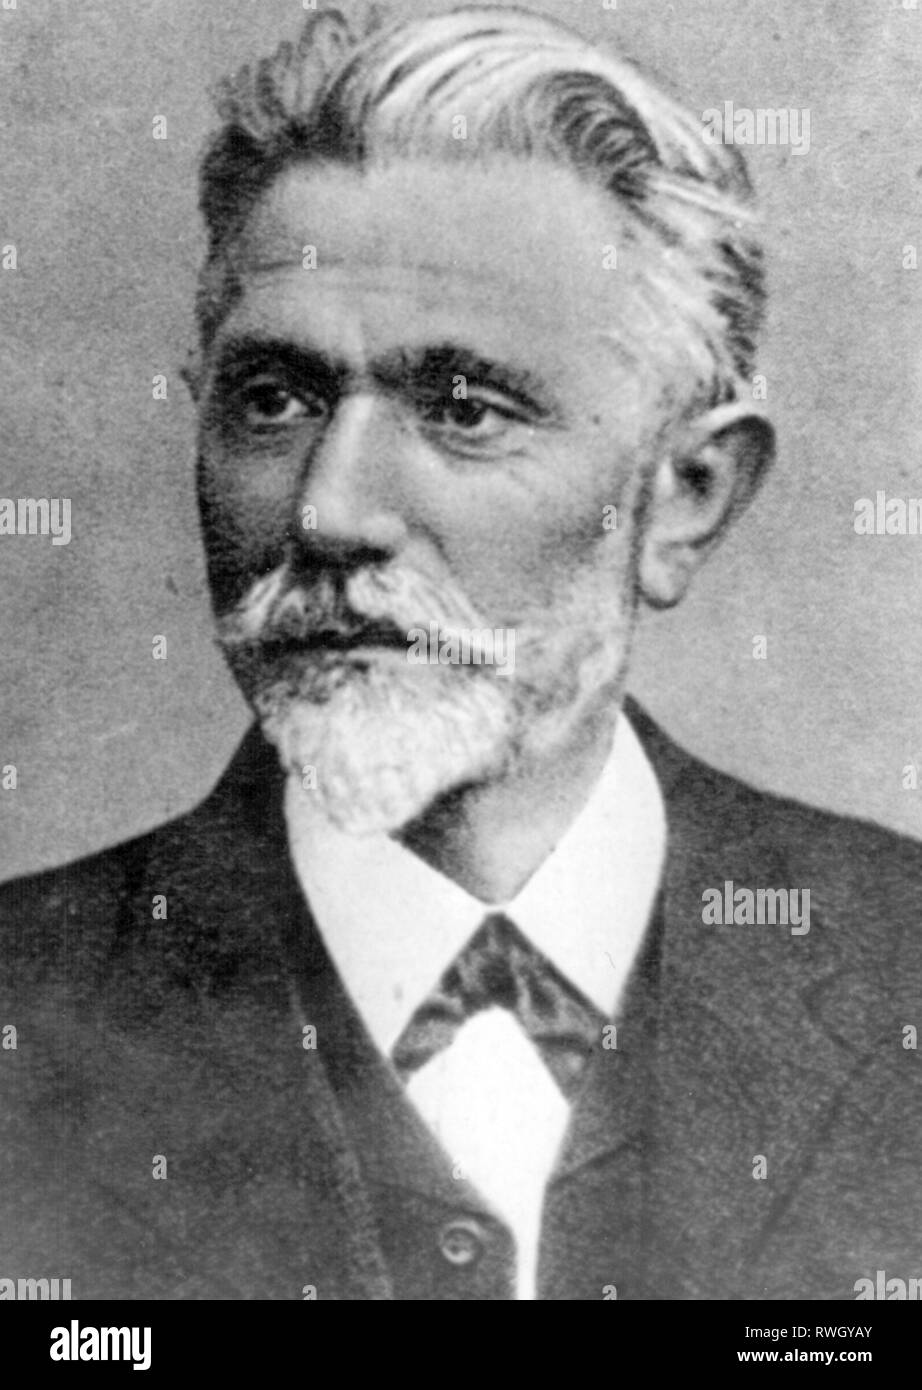 Bebel, August, 22.2.1840 - 13.8.1913, German politician and publicist, Member of the German Reichstag 1871 - 1881 and 1883 - 1913, portrait, circa 1895, Additional-Rights-Clearance-Info-Not-Available Stock Photo